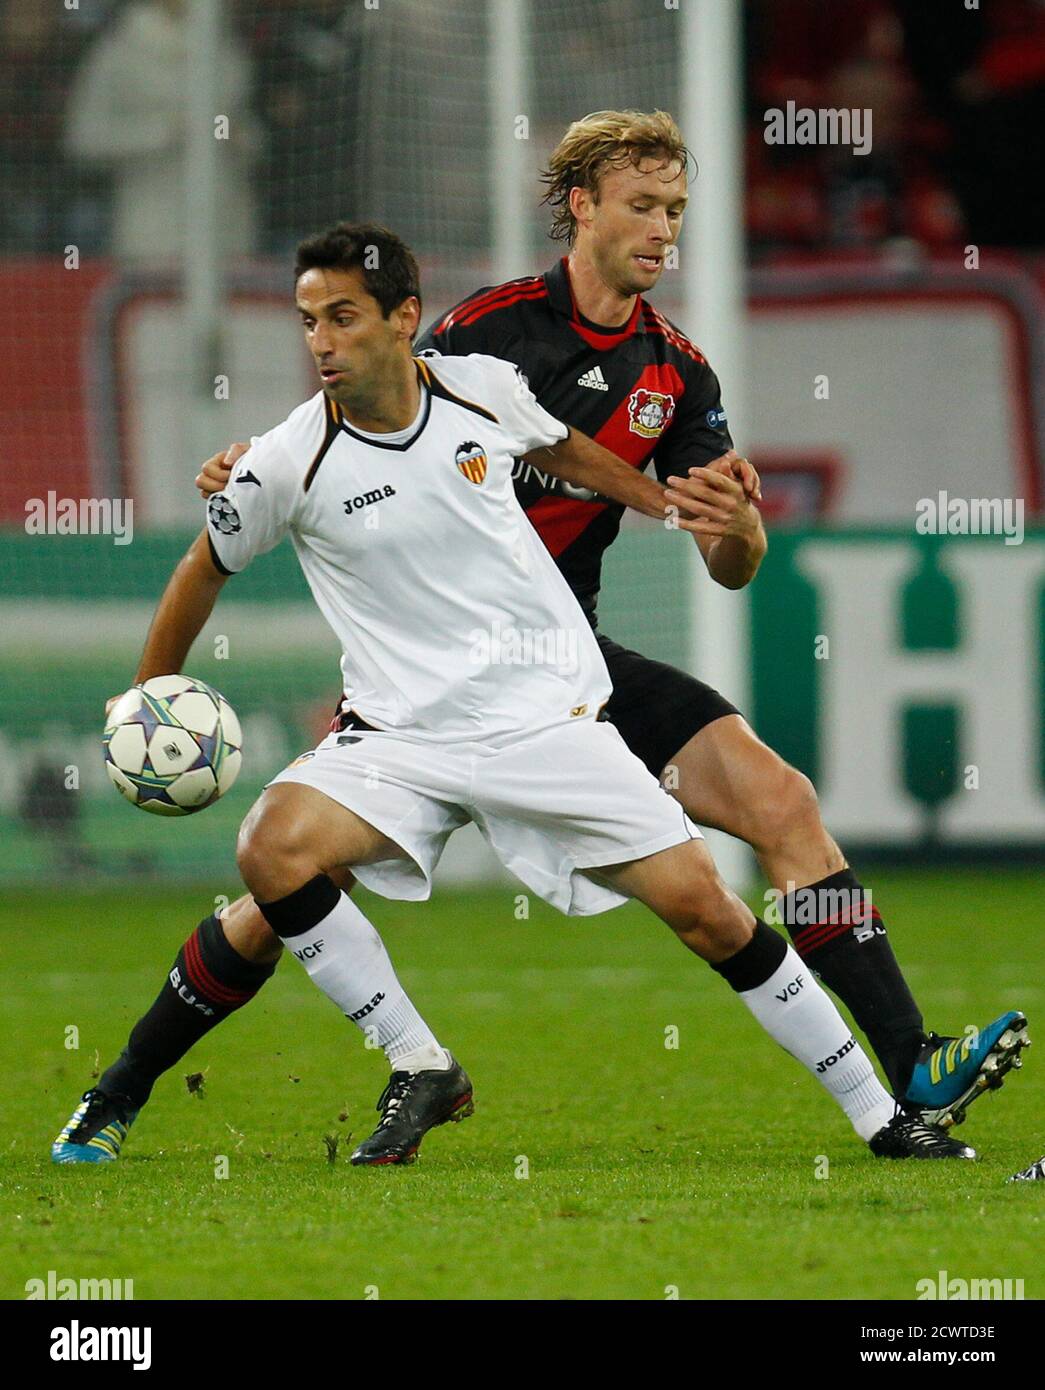 Bayer Leverkusen's Simon Rolfes (L) challenges FC Valencia's Jonas during  their Champions League Group E soccer match in Leverkusen October 19, 2011.  REUTERS/Ina Fassbender (GERMANY - Tags: SPORT SOCCER Stock Photo - Alamy